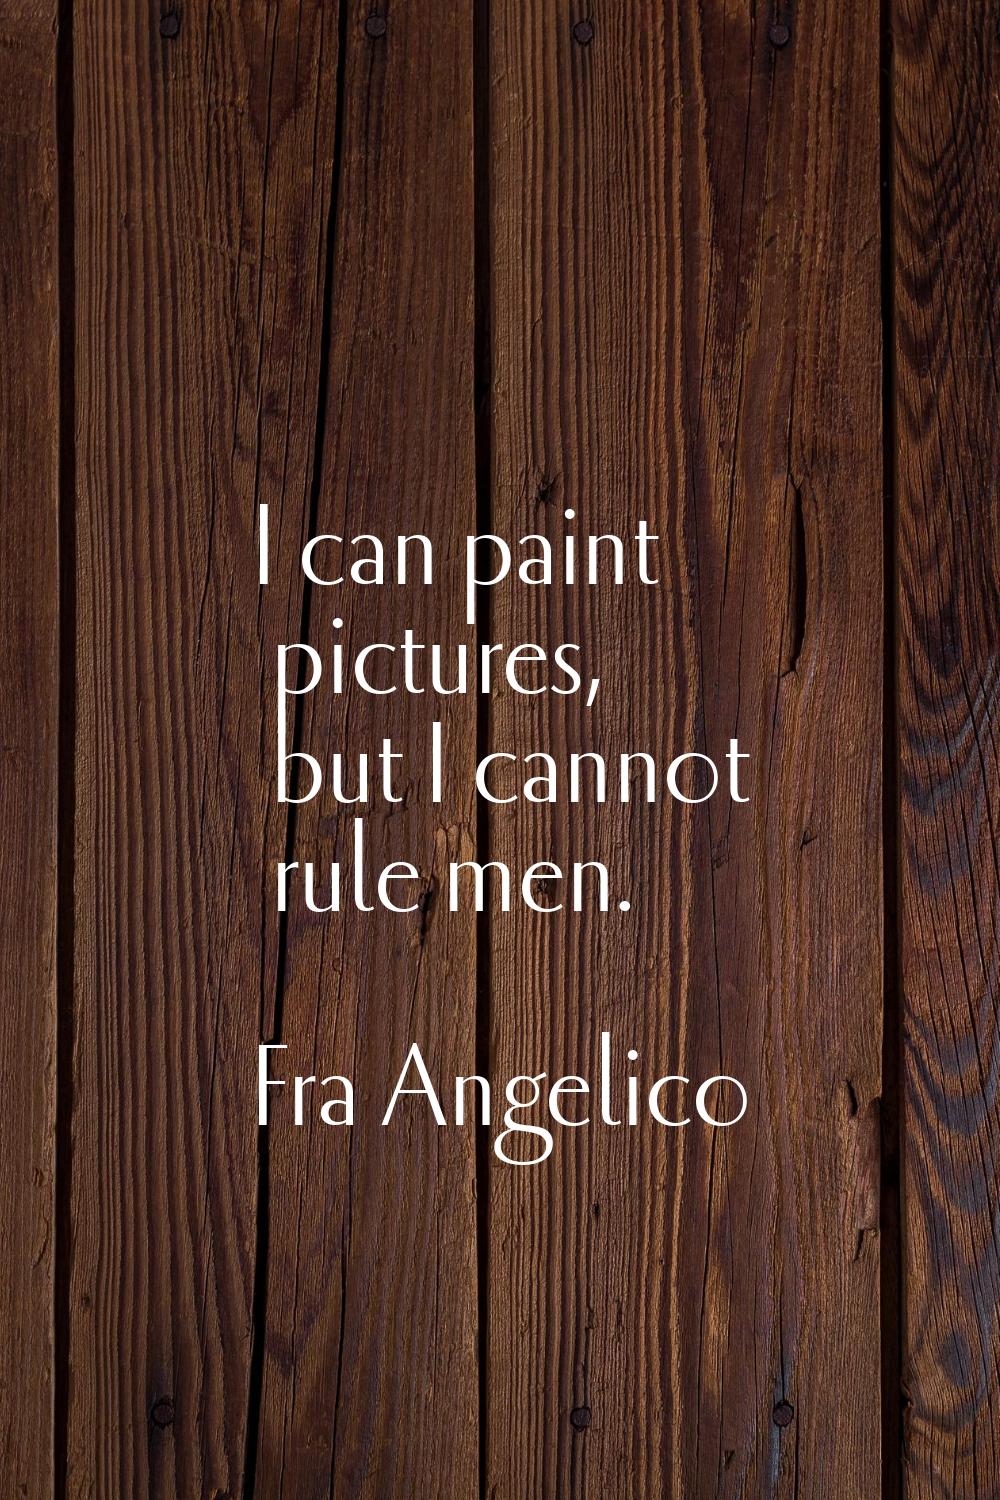 I can paint pictures, but I cannot rule men.